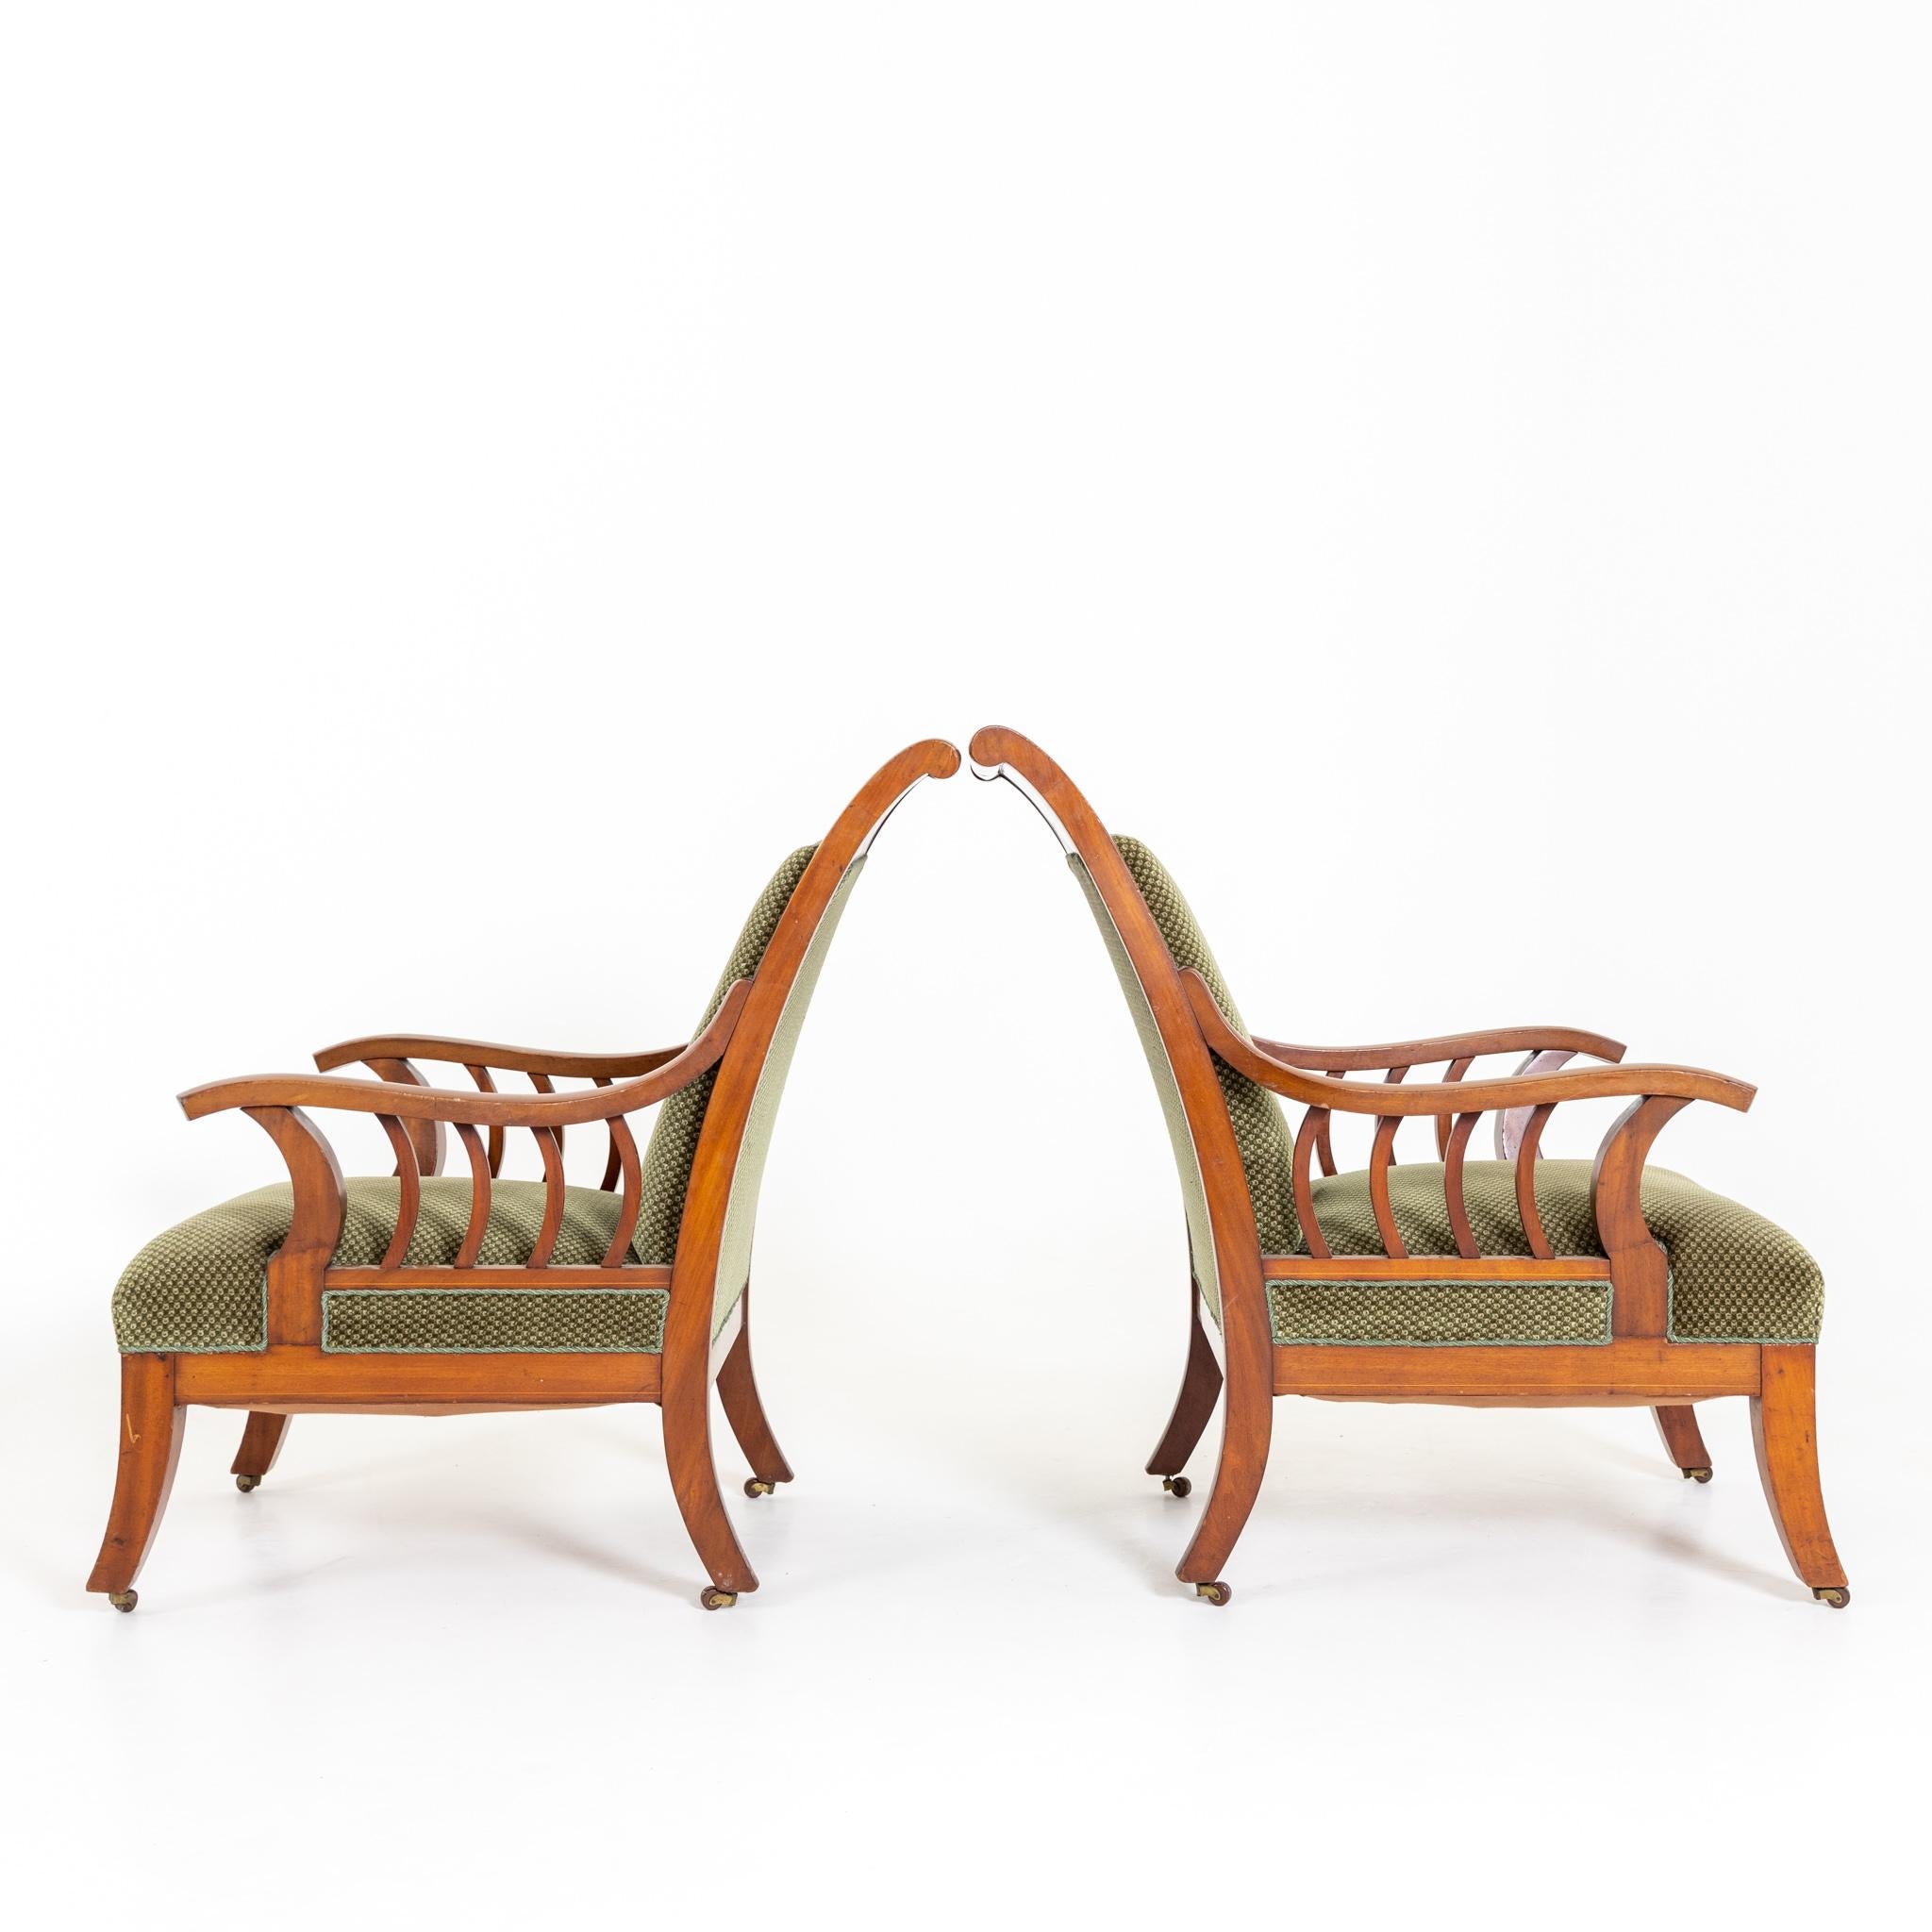 Pair of Scandinavian armchairs with sled shaped backs and elegantly curved armrests with thread inlays. Unrestored condition.